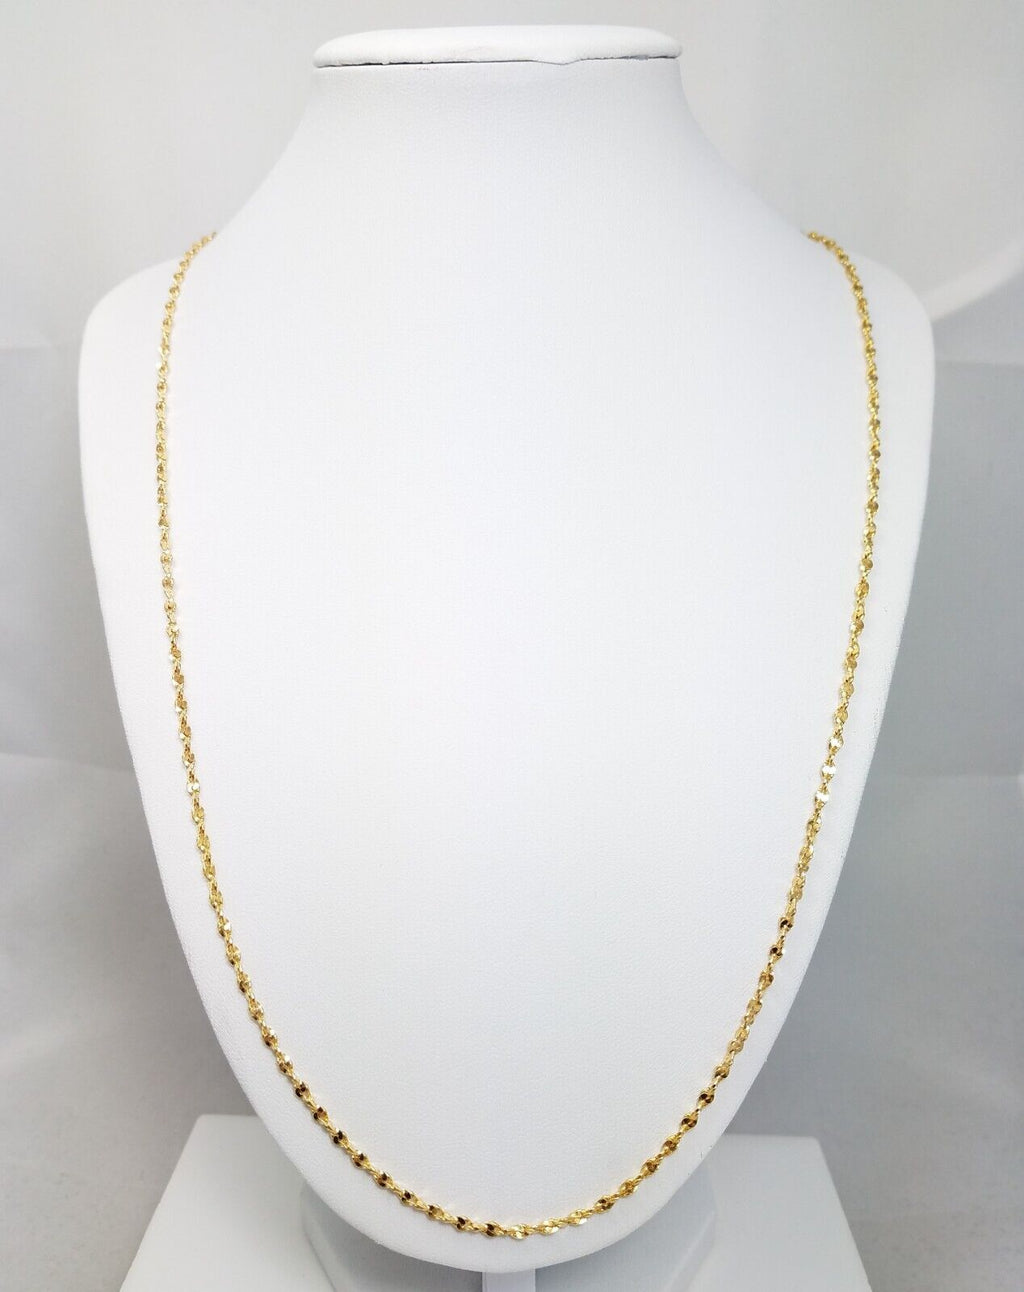 24" 18k Solid Yellow Gold Fancy Link Chain Necklace